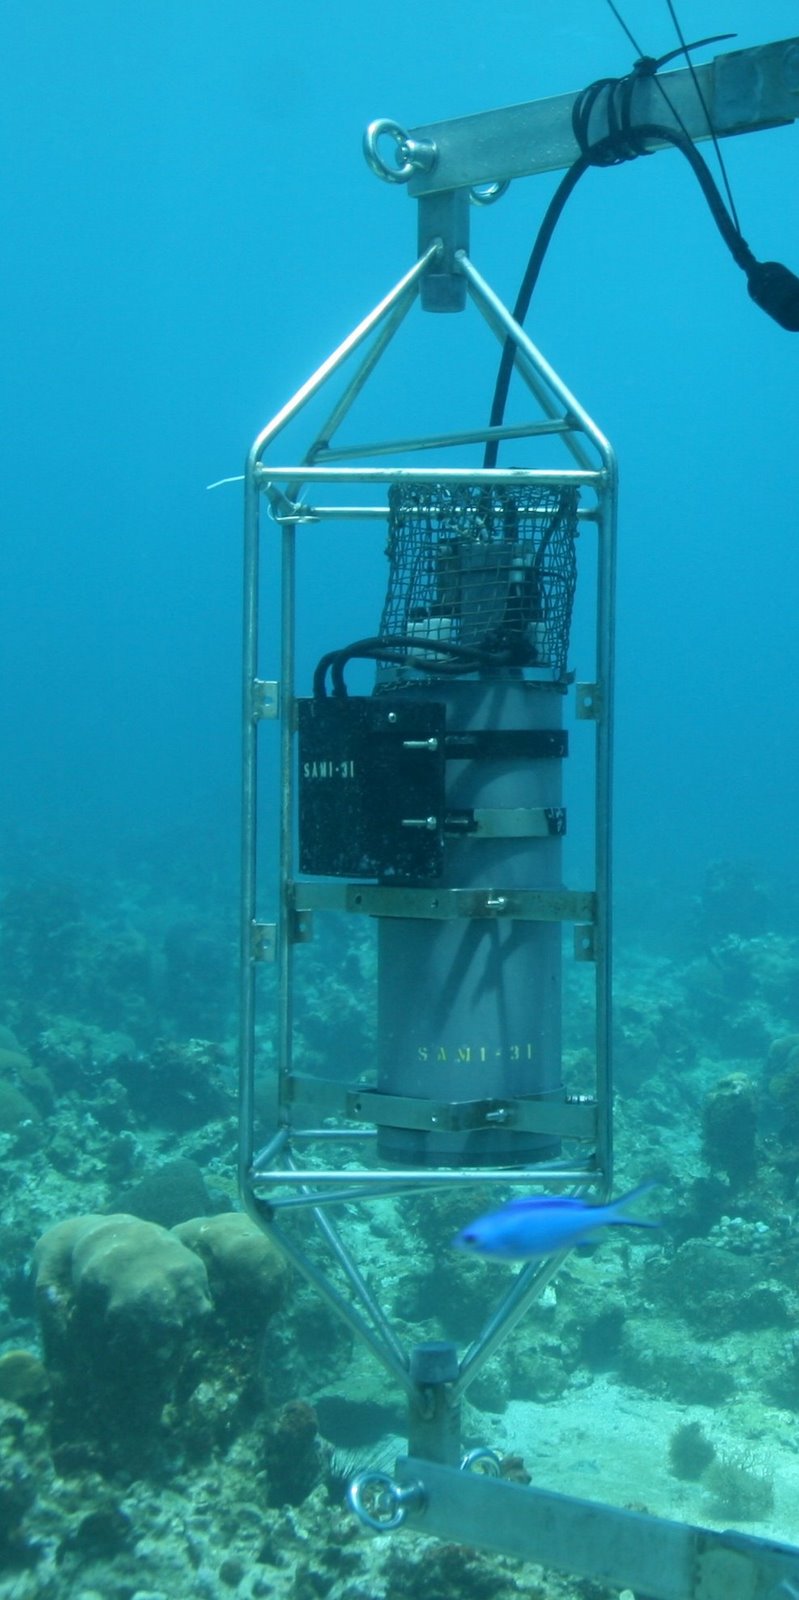 The SAMI pCO2 sensor helps determine how high levels of CO2 and ocean acidification affect coral reefs